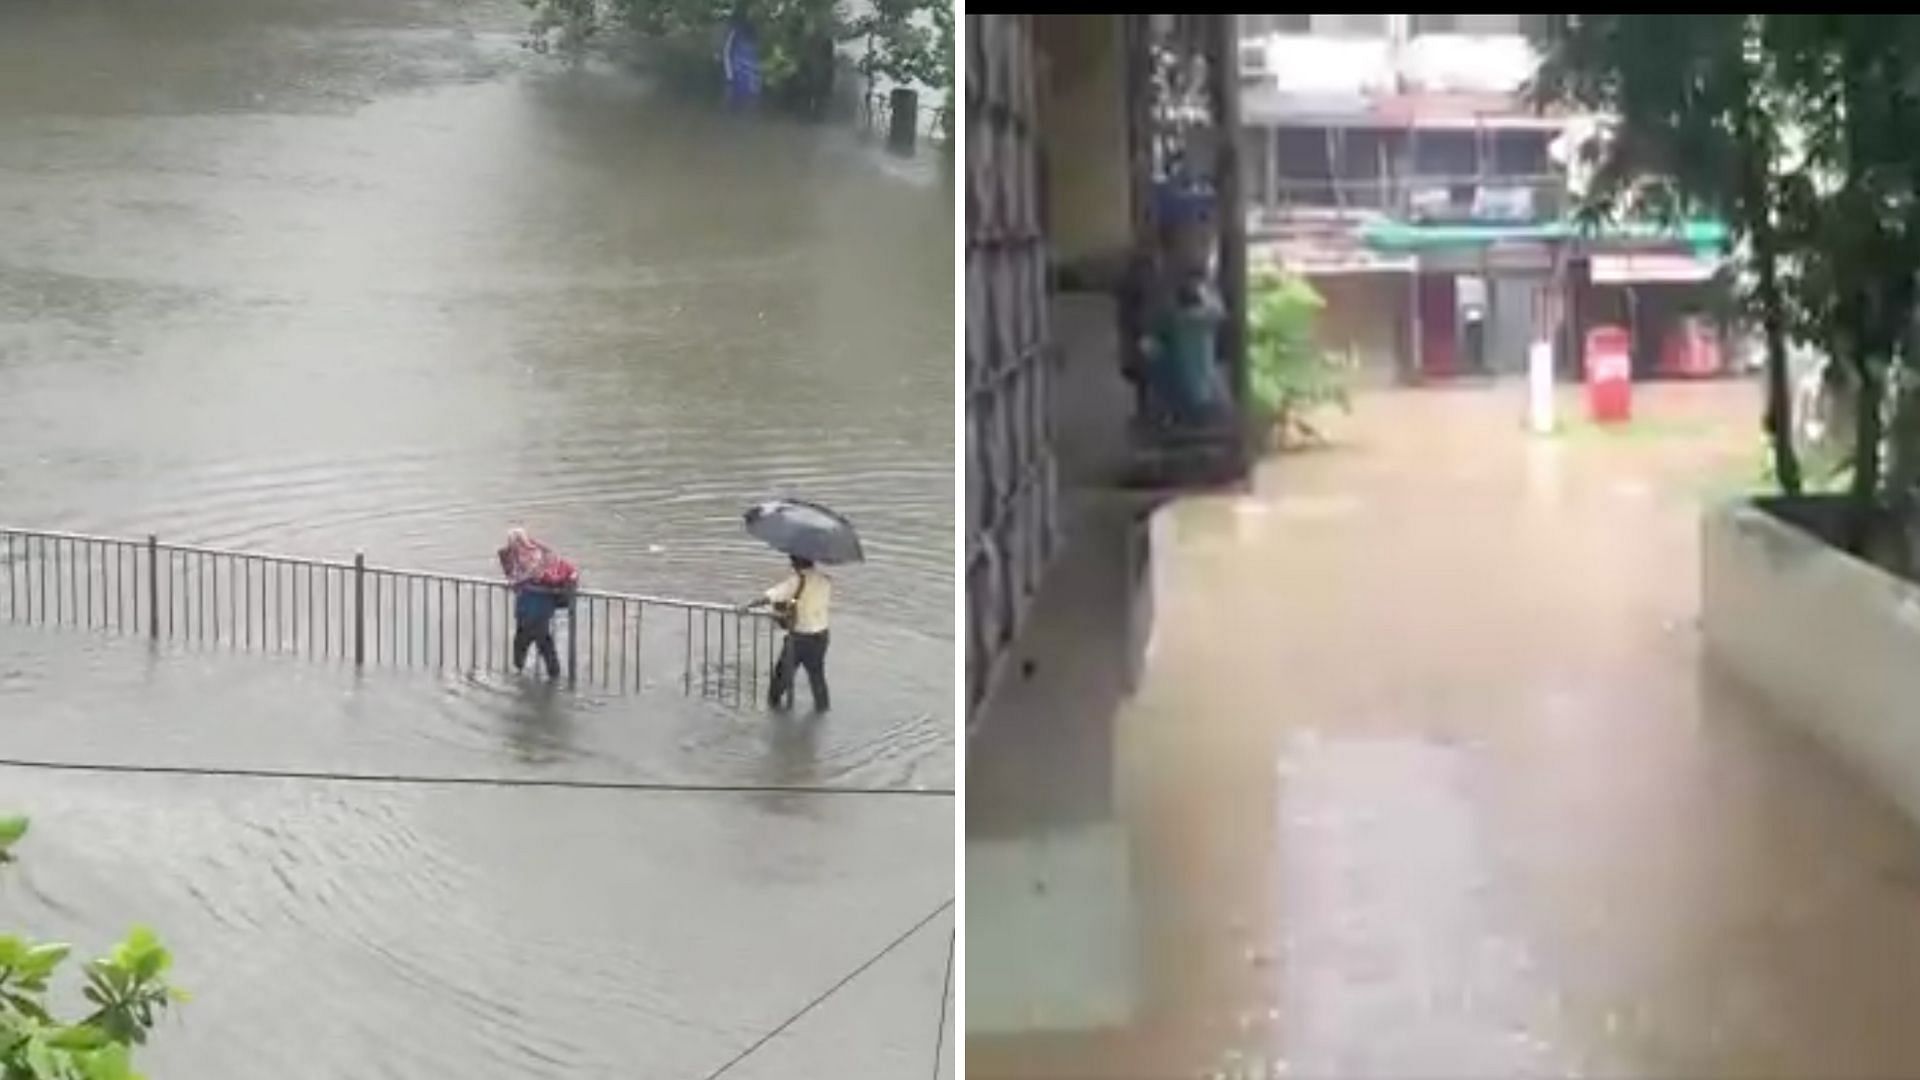 The IMD had on Monday issued a ‘red alert’ for “extremely heavy rainfall” in the city on Tuesday and Wednesday